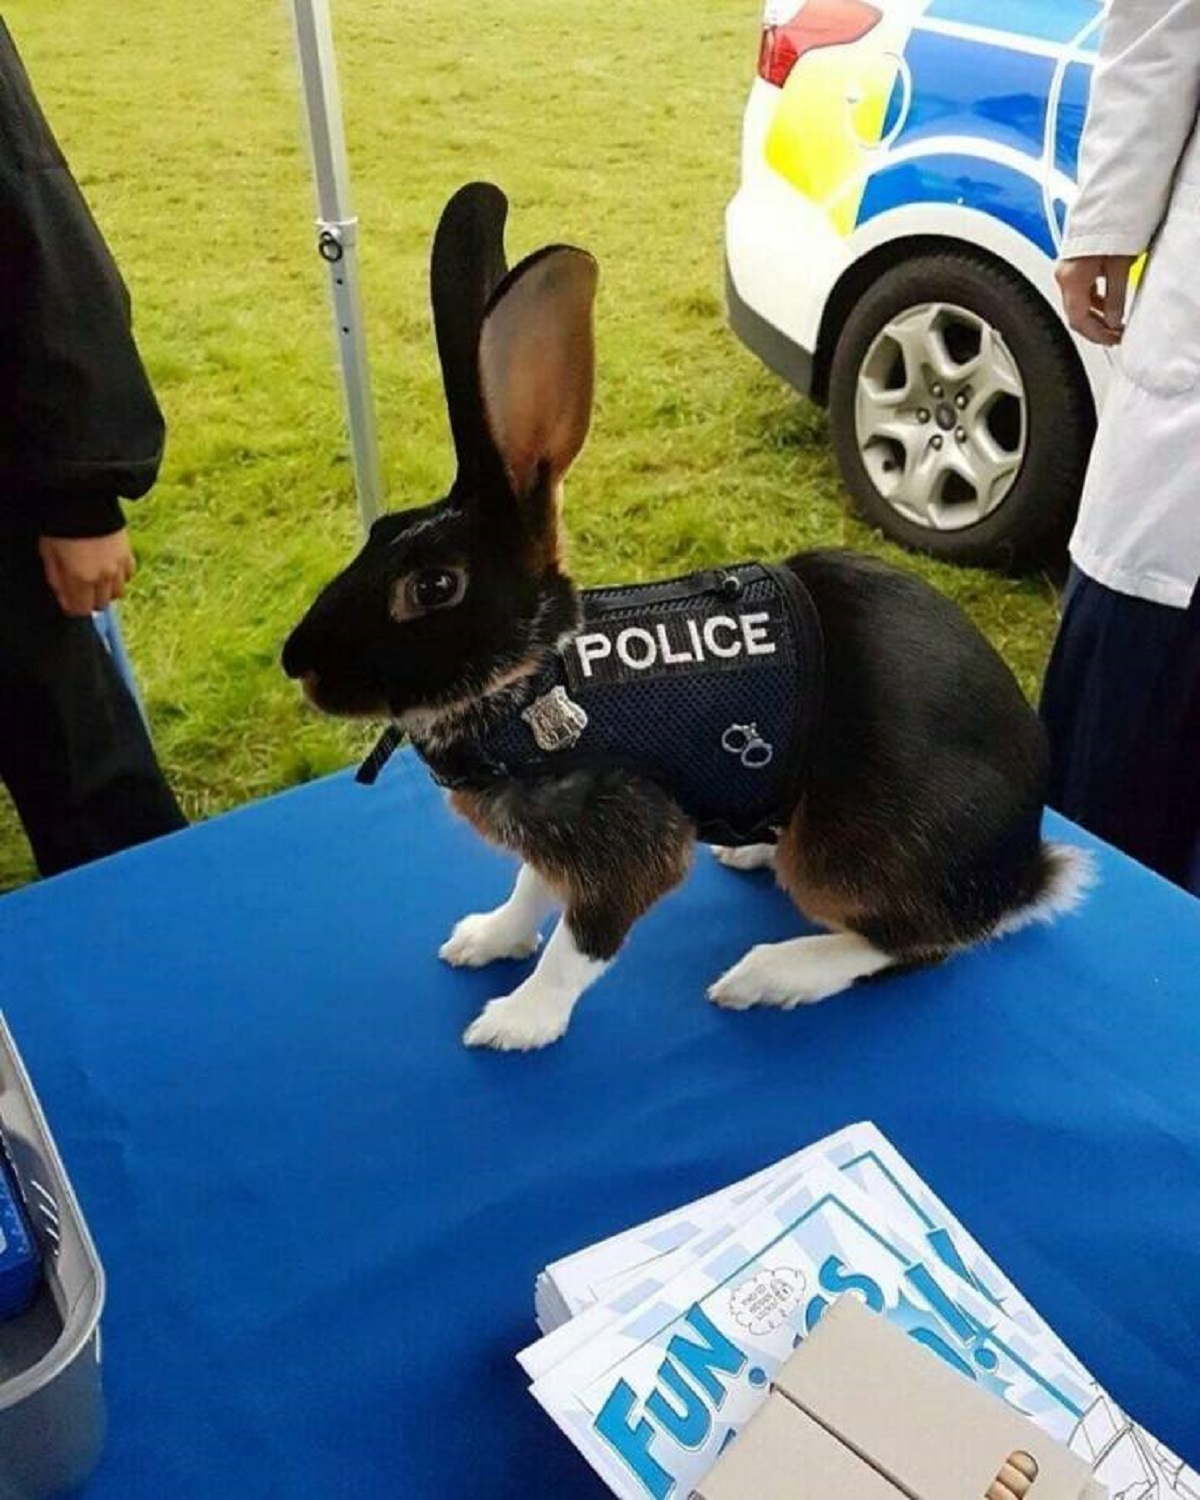 "Sometimes Police Use Rabbits For Their Sense Of Smell To Find Locations Of Decomposition"